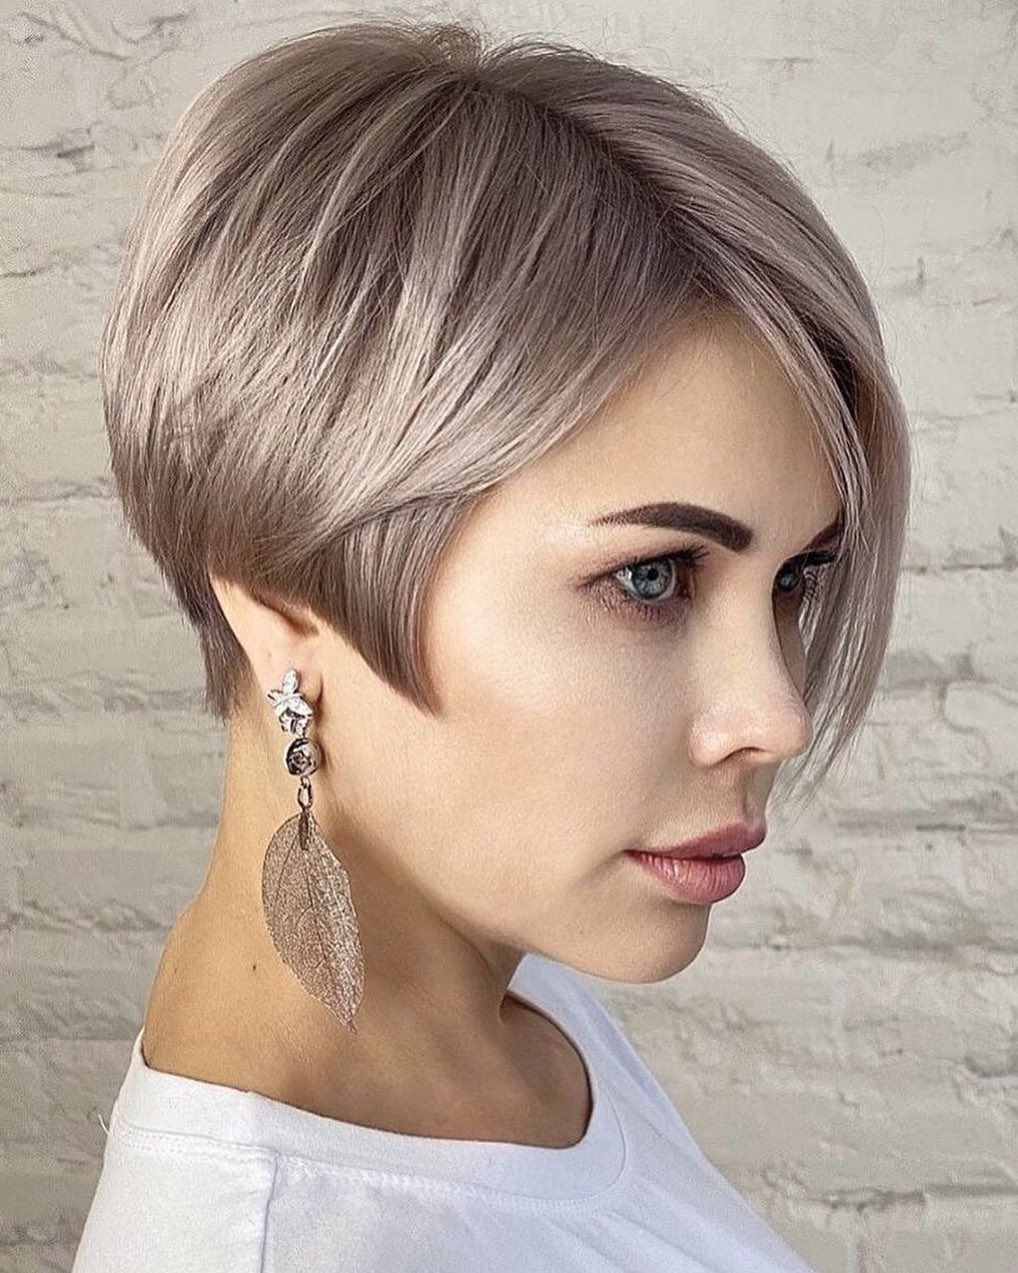 Cute Short Haircuts for Thick Hair - Women Short Hairstyle Trends